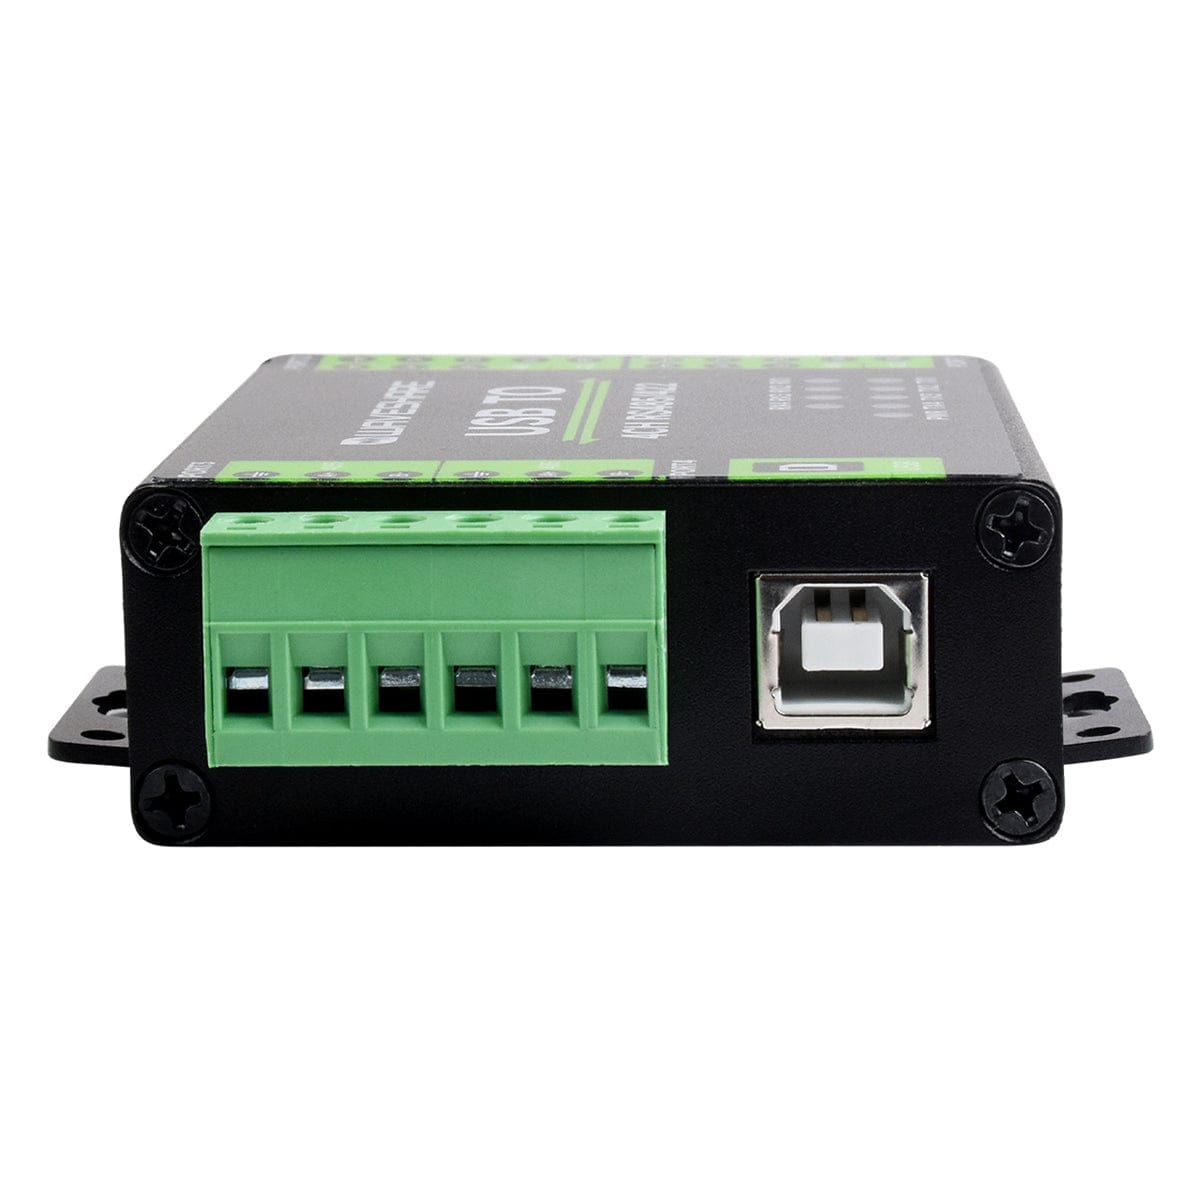 Industrial Isolated USB to 4-Channel RS485/422 Converter - The Pi Hut